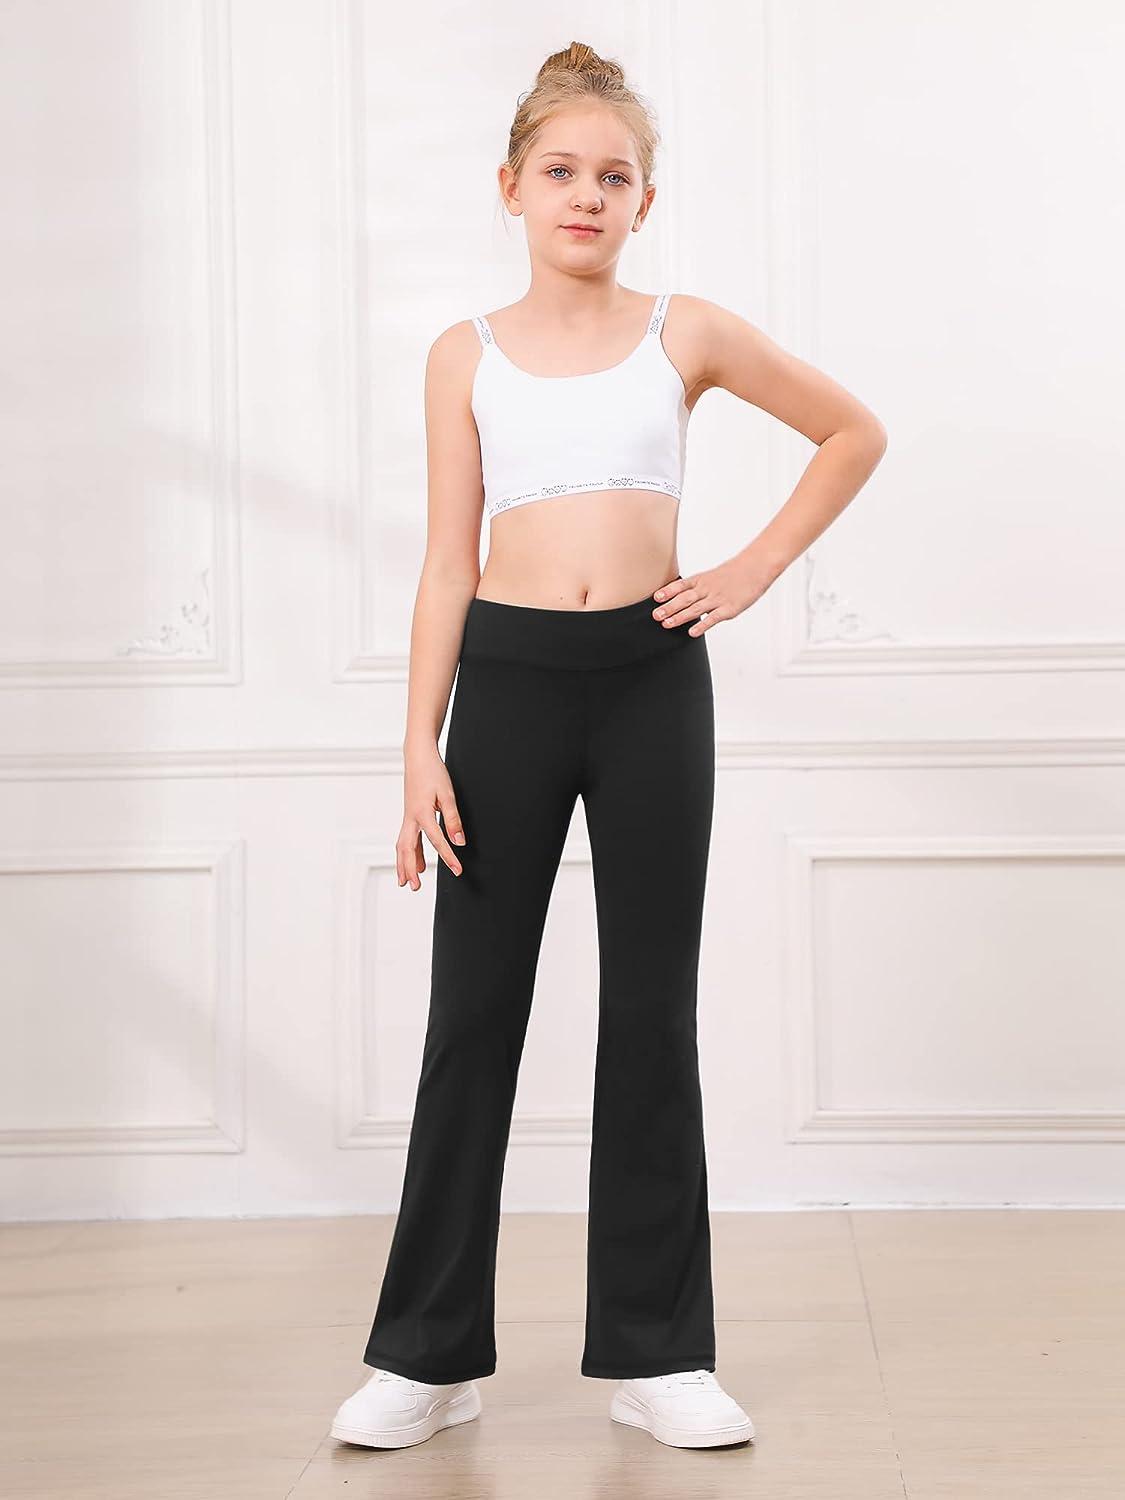 Ruanyu Kids Casual High Waisted Flare Pants for Girls Cute Workout Dancing  Yoga Bell Bottoms Leggings 